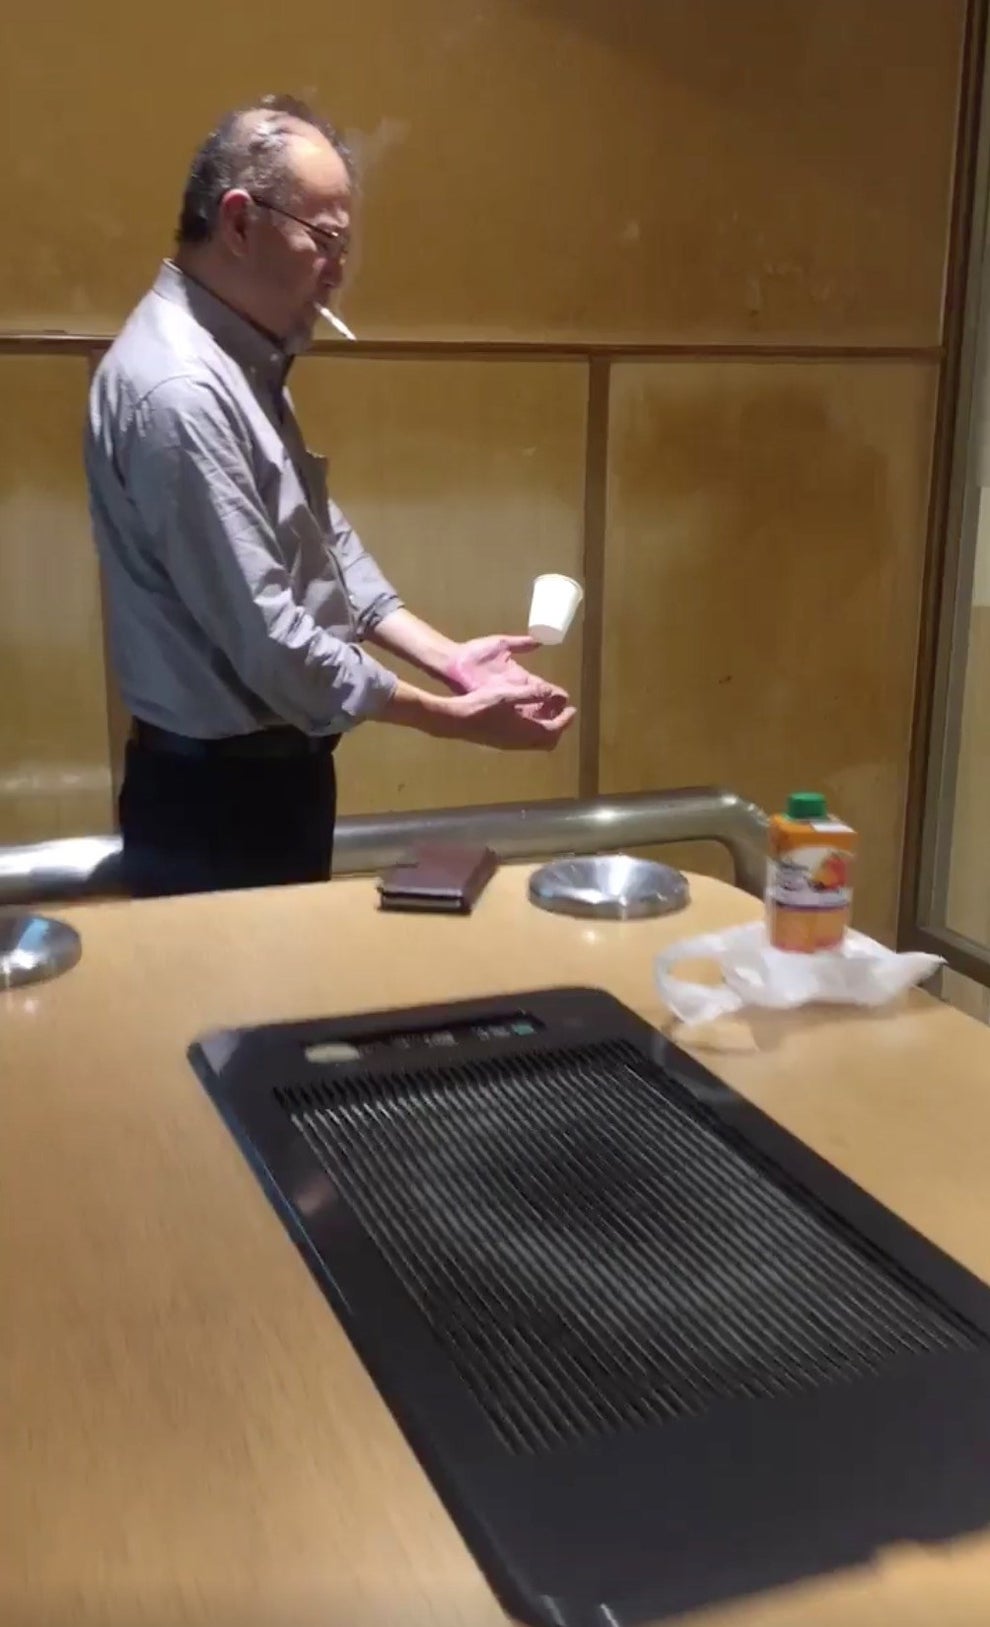 Japan Actually Has Real Life Magicians And It's Wild